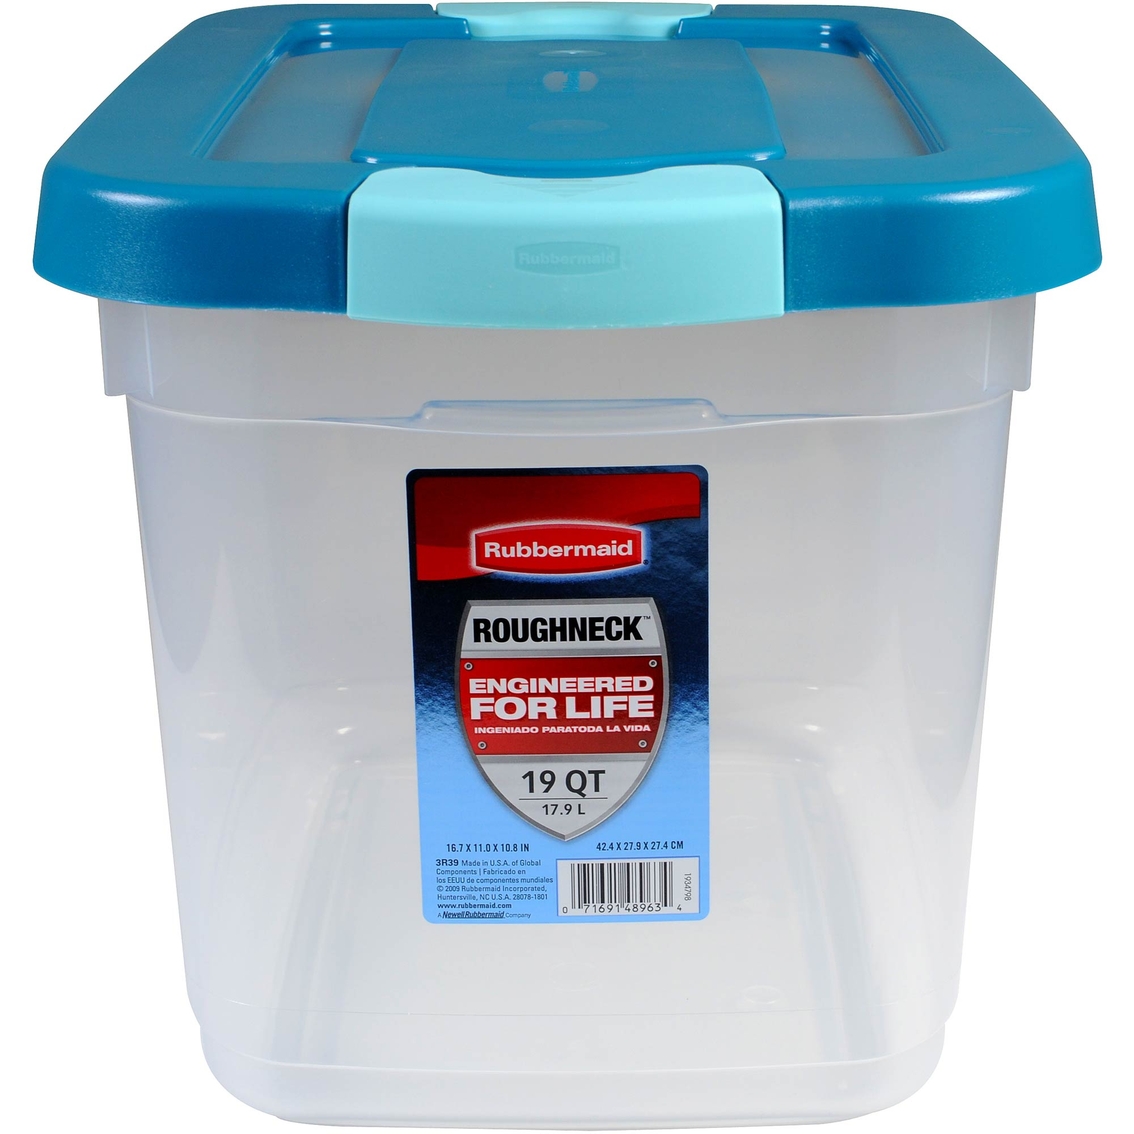 Rubbermaid Roughneck Clear 19 Qt. Latching Storage Box, Atg Archive